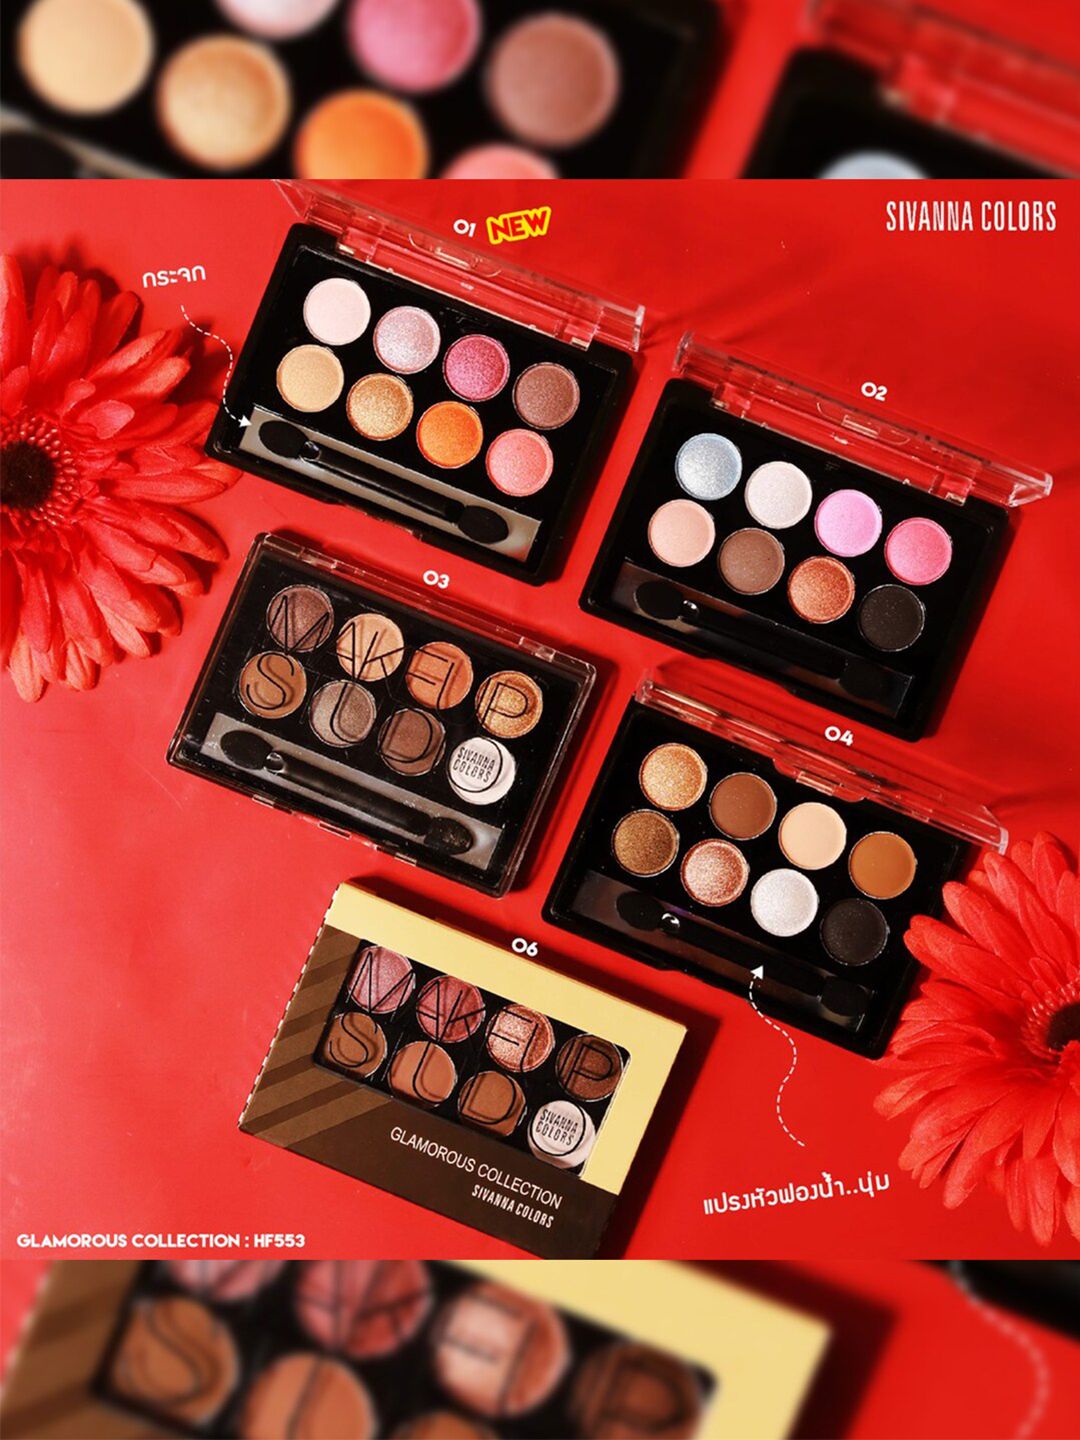 Sivanna Colors Make-Up Studio Glamorous Collection Eye Shadow Palette - HF553 02 Price in India